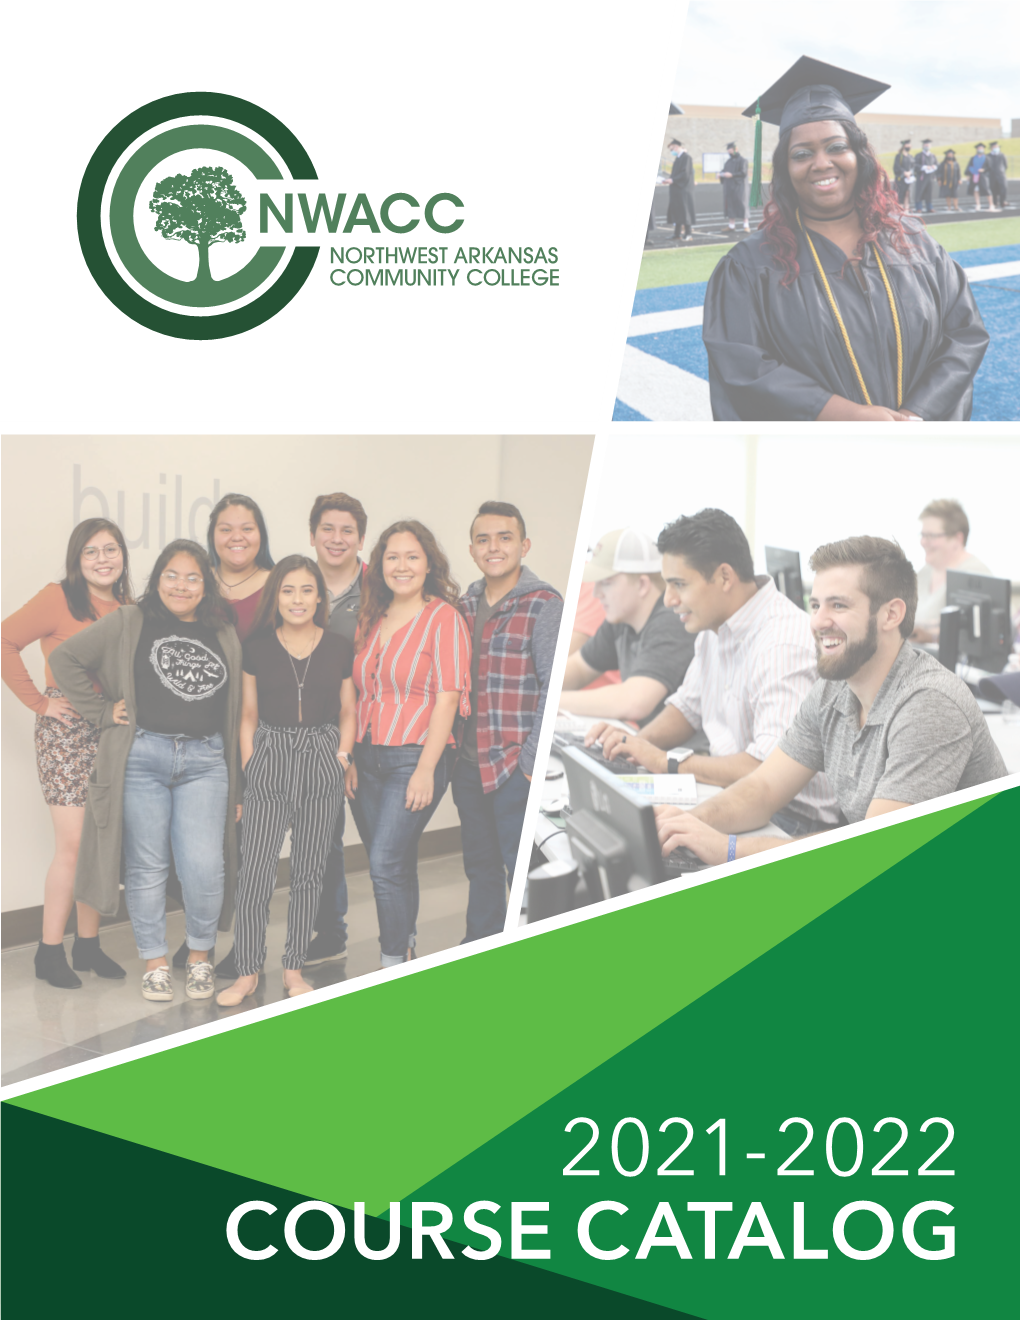 2021-2022 Course Catalog Course Catalog 2021-2022 Maximize Potential - Exceed Expectations